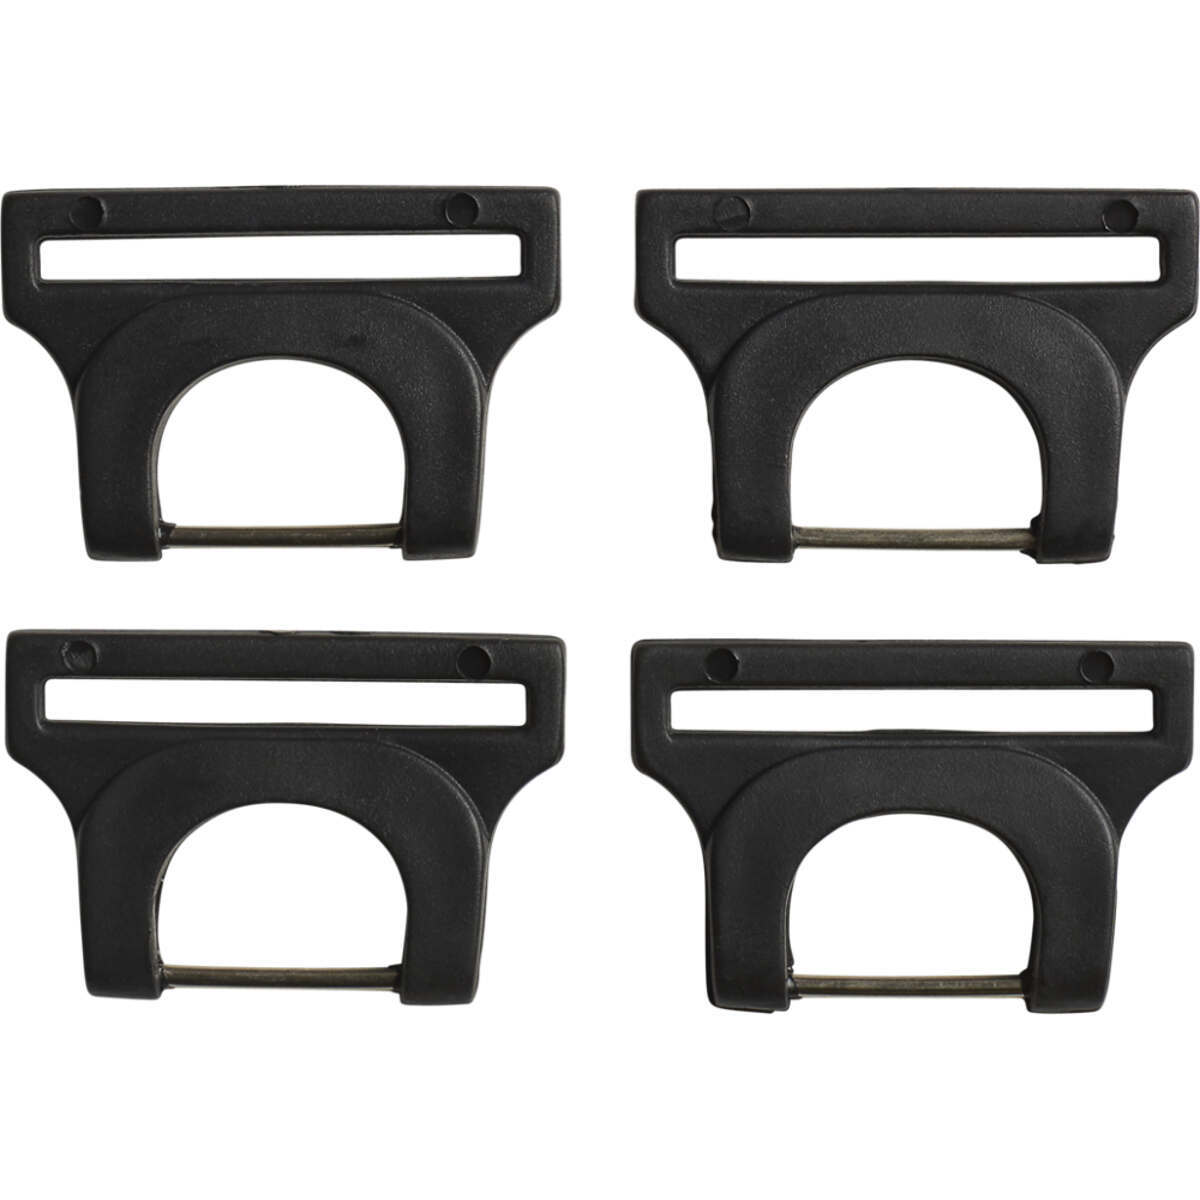 Fox Replacement D-Ring Set for Knee and Shin Guard Titan Sport/Race Black - 4 Pieces